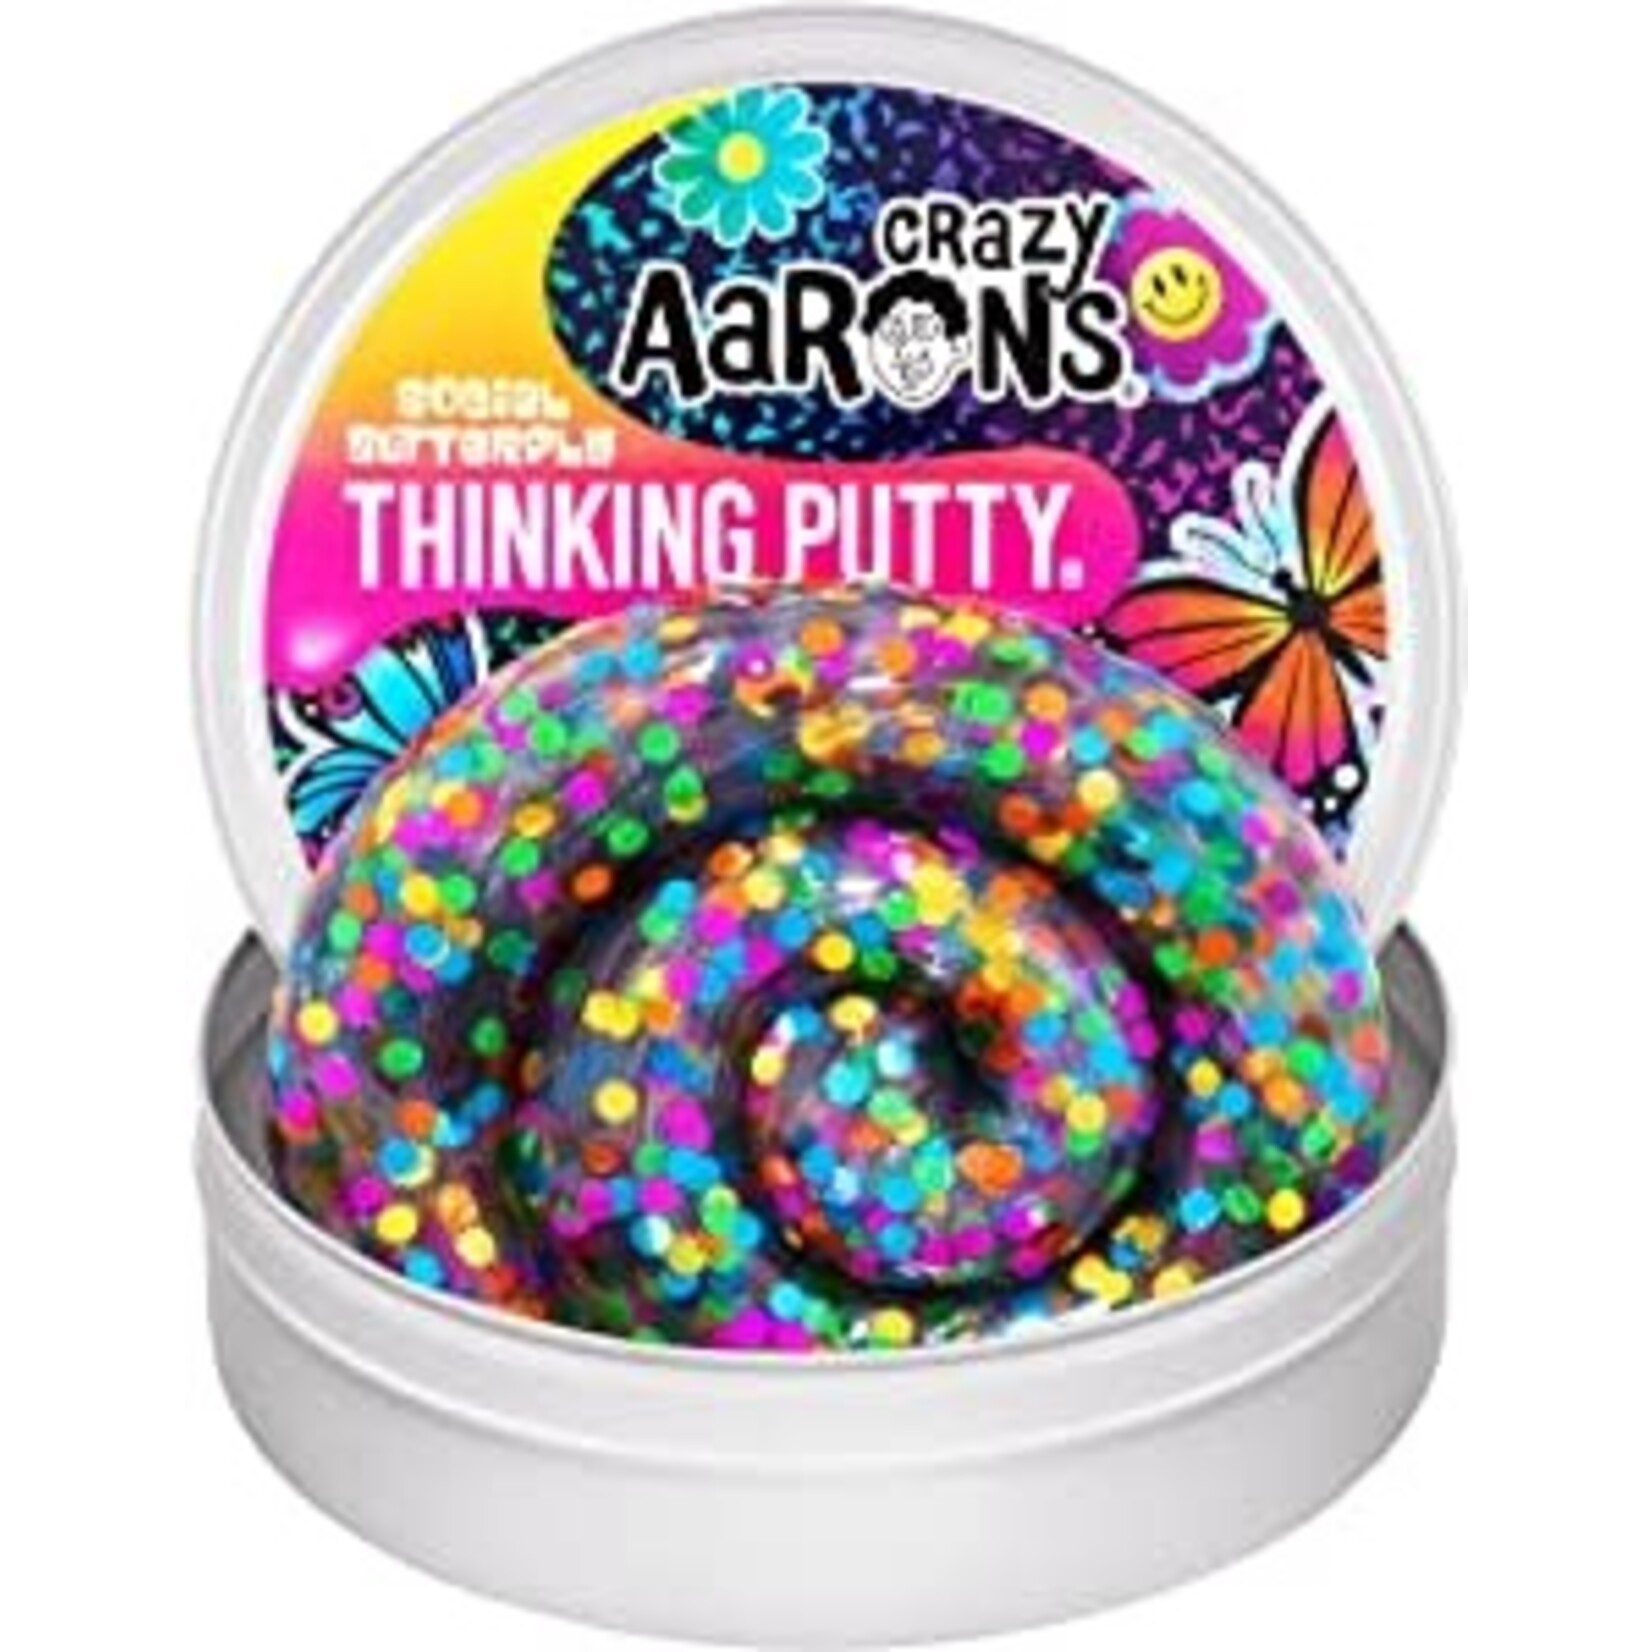 Crazy Aaron's Thinking Putty Social Butterfly Thinking Putty